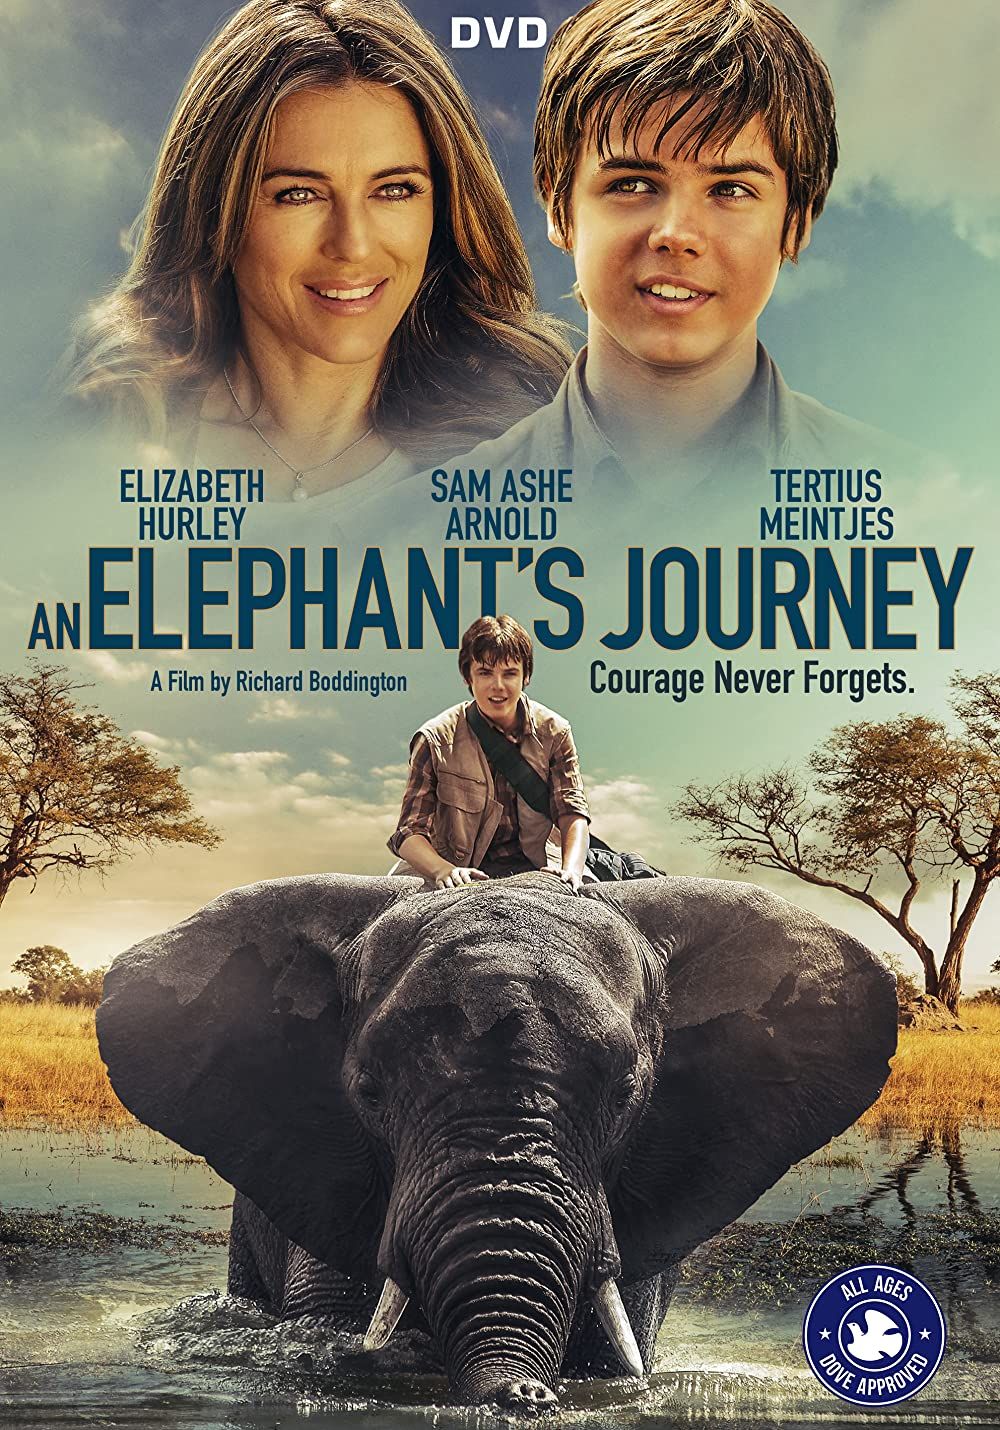 An Elephants Journey (2017) Hindi Dubbed HDRip download full movie